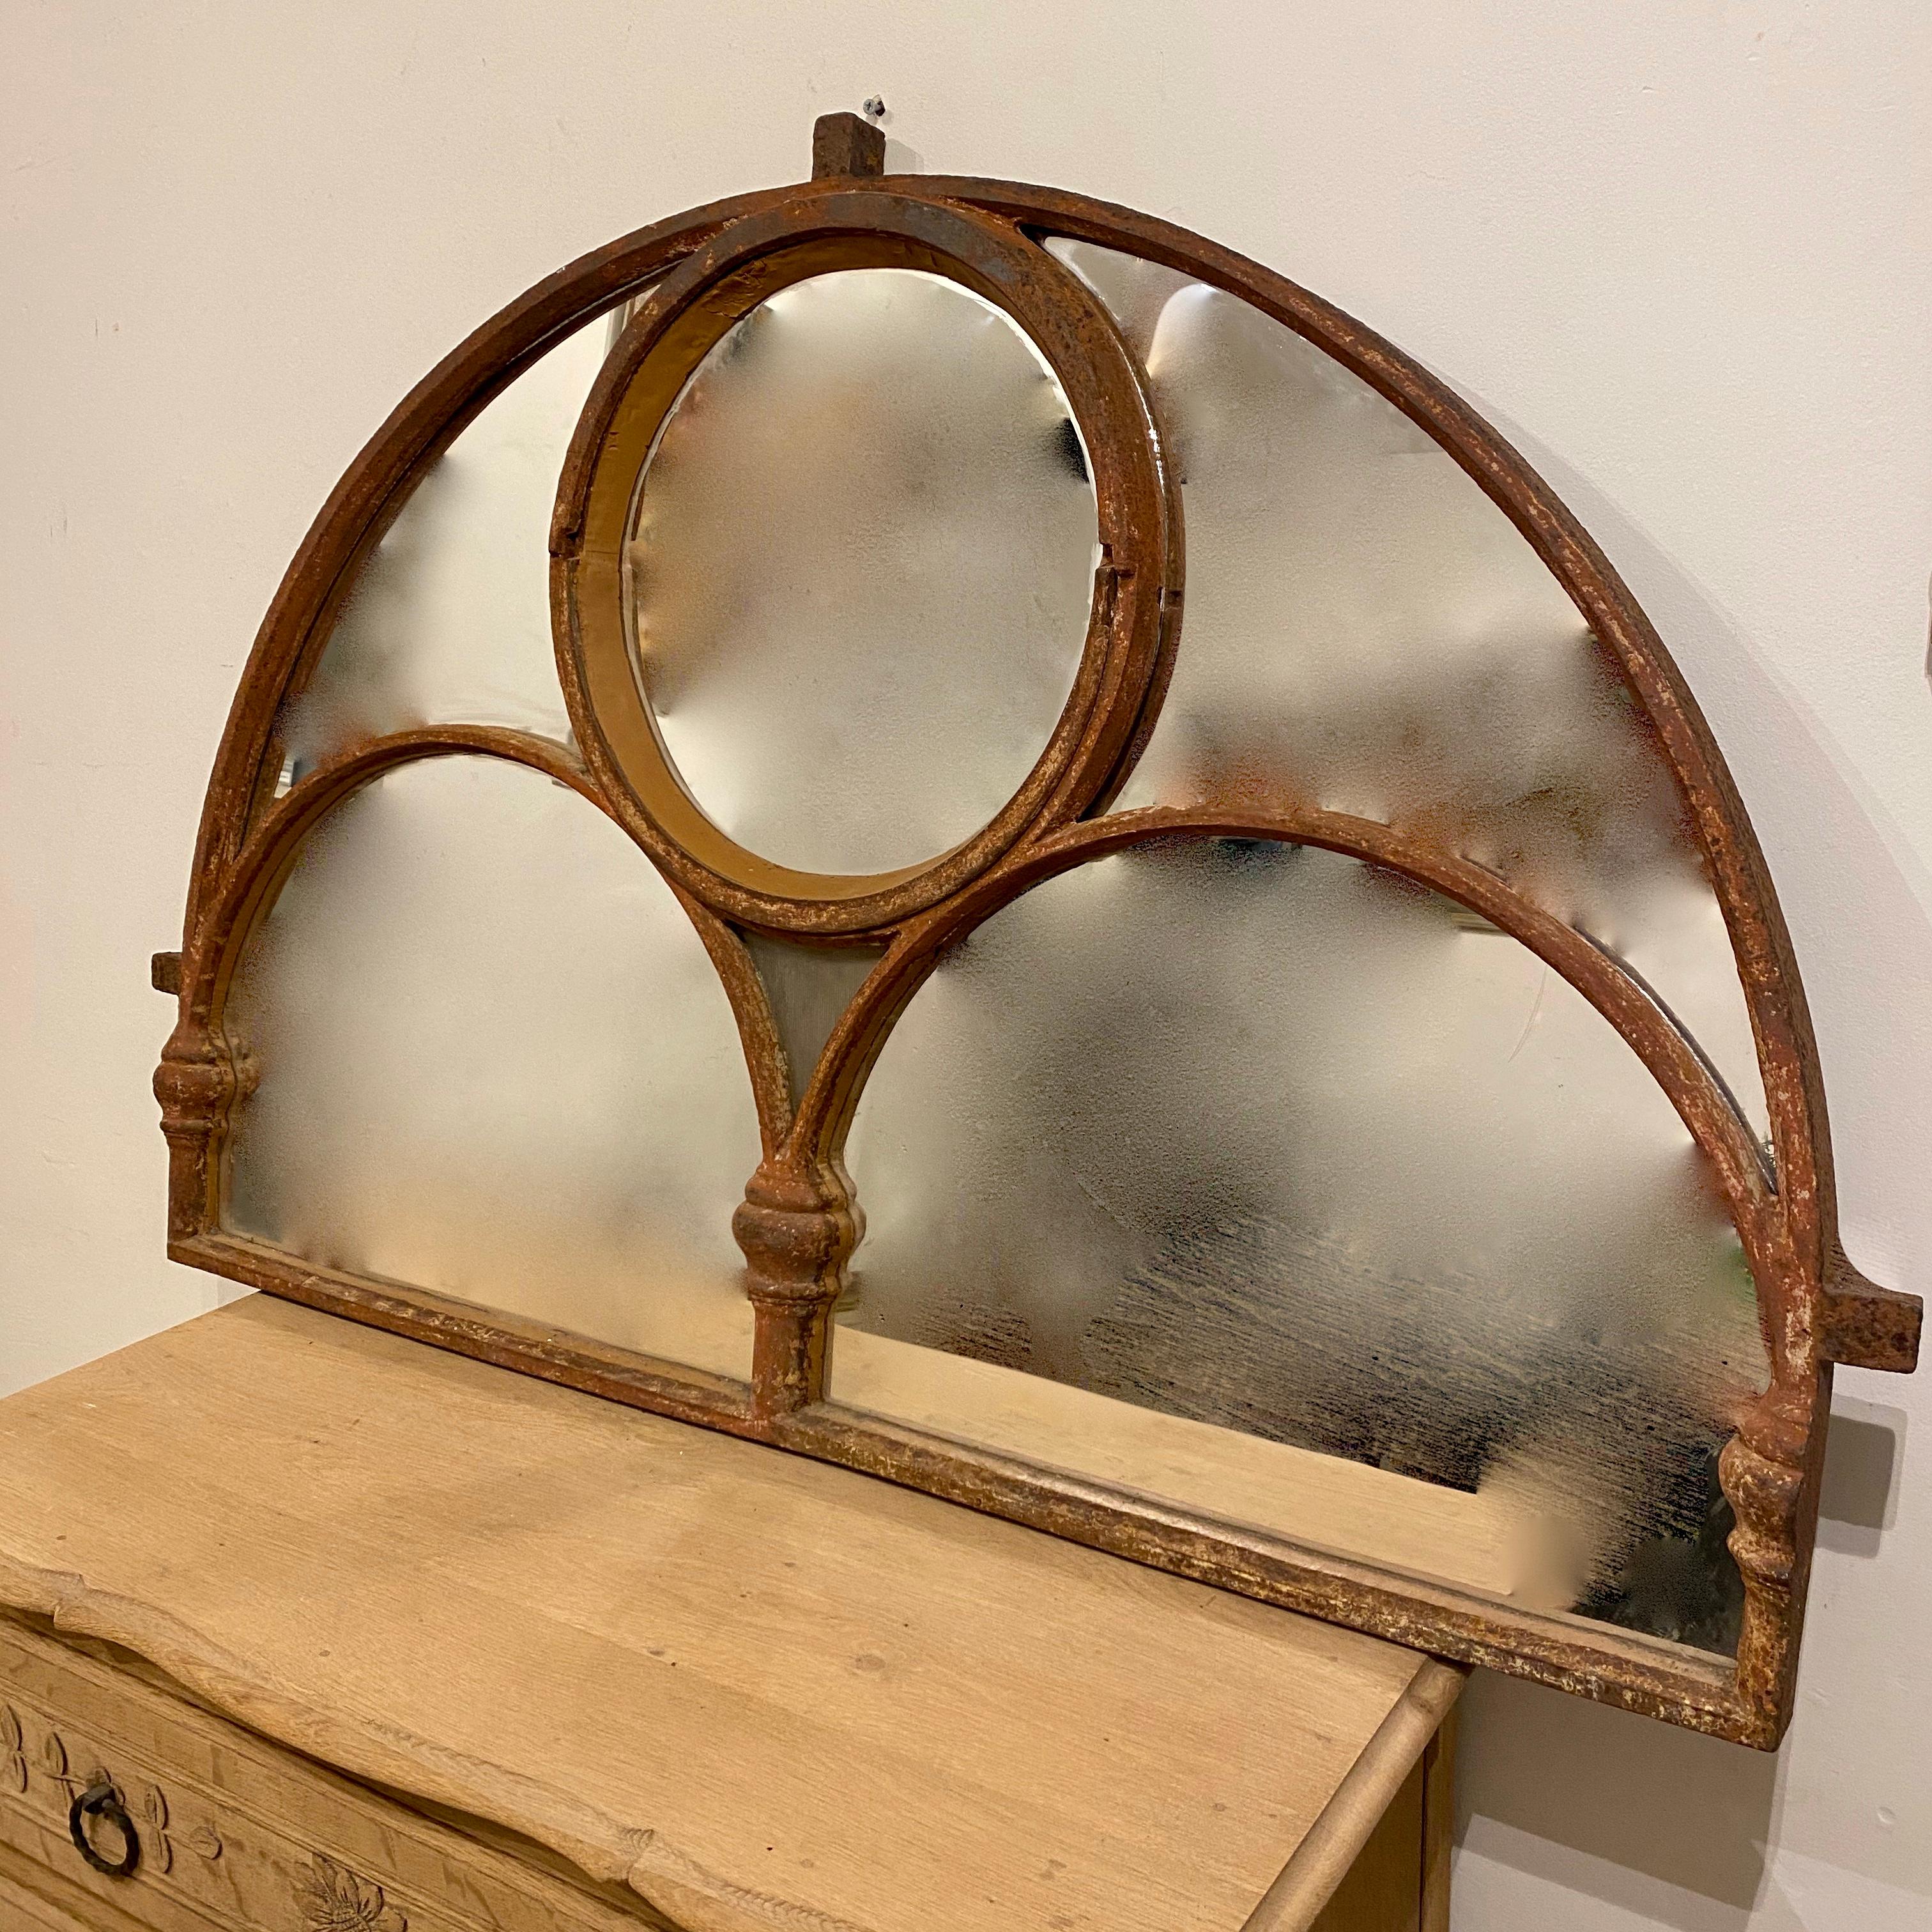 A handsome and large Victorian cast iron arched window mirror. Originally a reclaimed cast iron window from the old Brighton Aquarium and now repurposed as a mirror. The larger cast iron arch being split by two smaller inner arches with upper